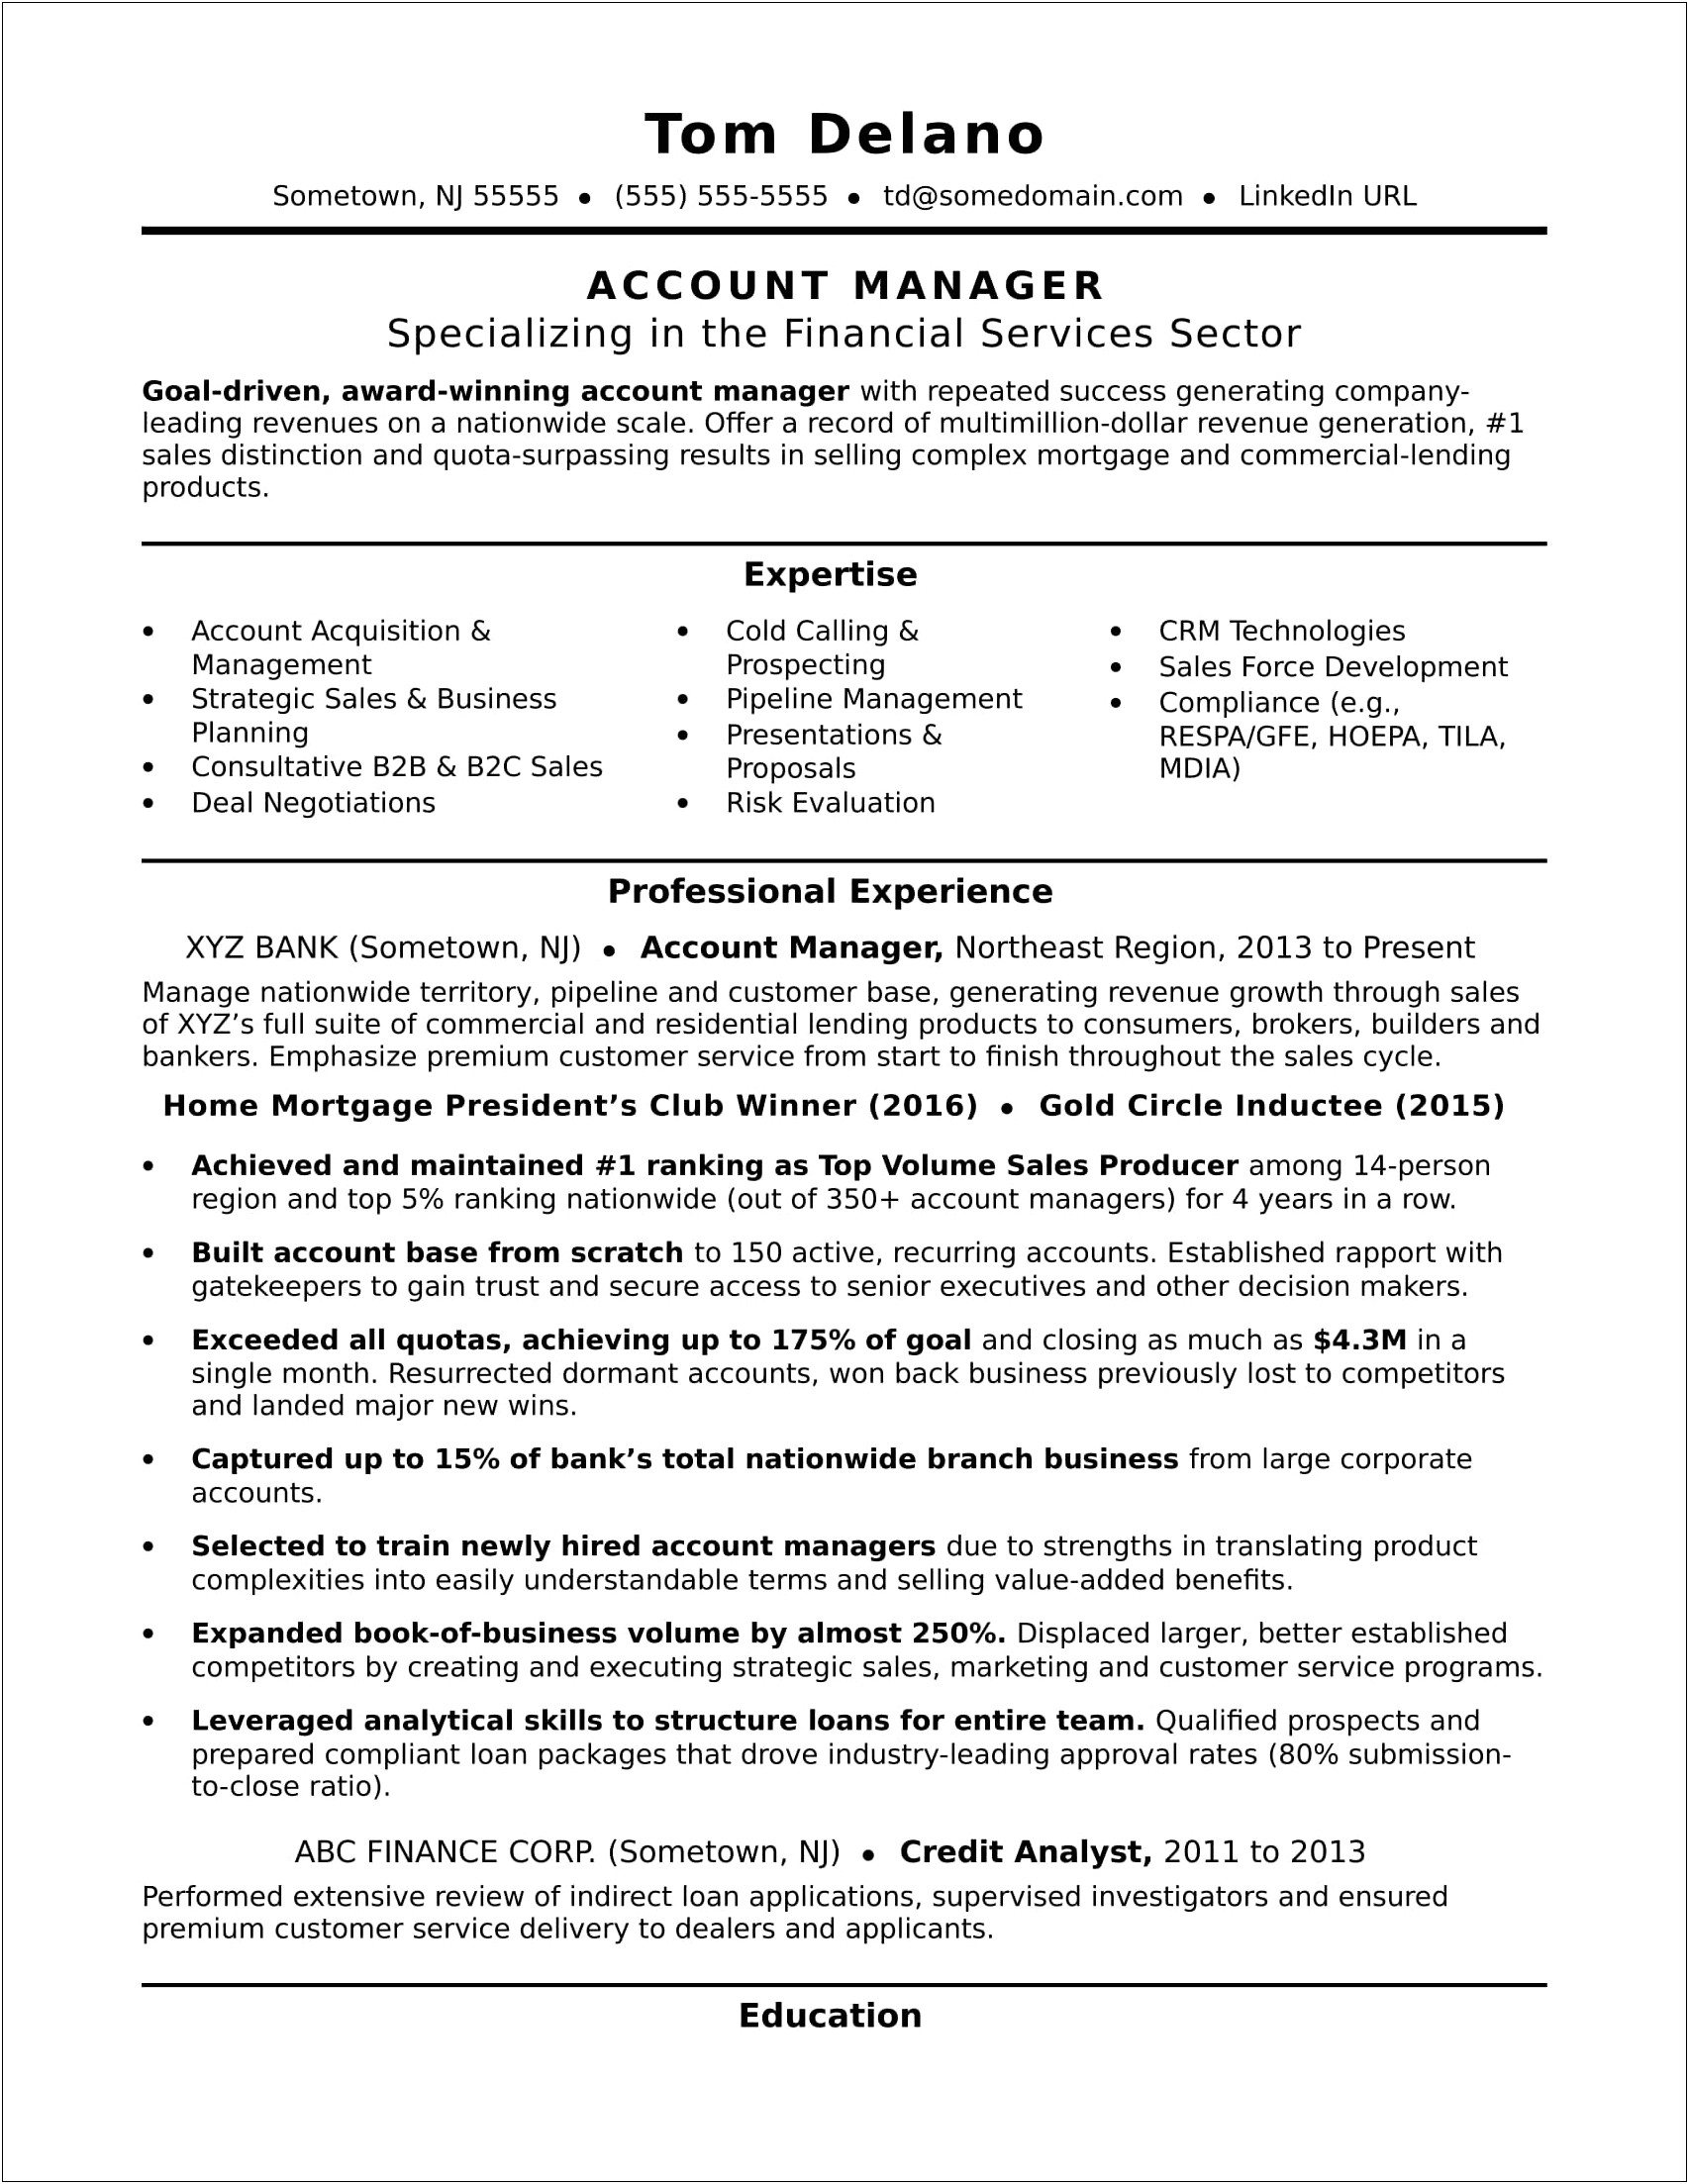 Hiring Manager Salary Negotiation Achievement For Resume